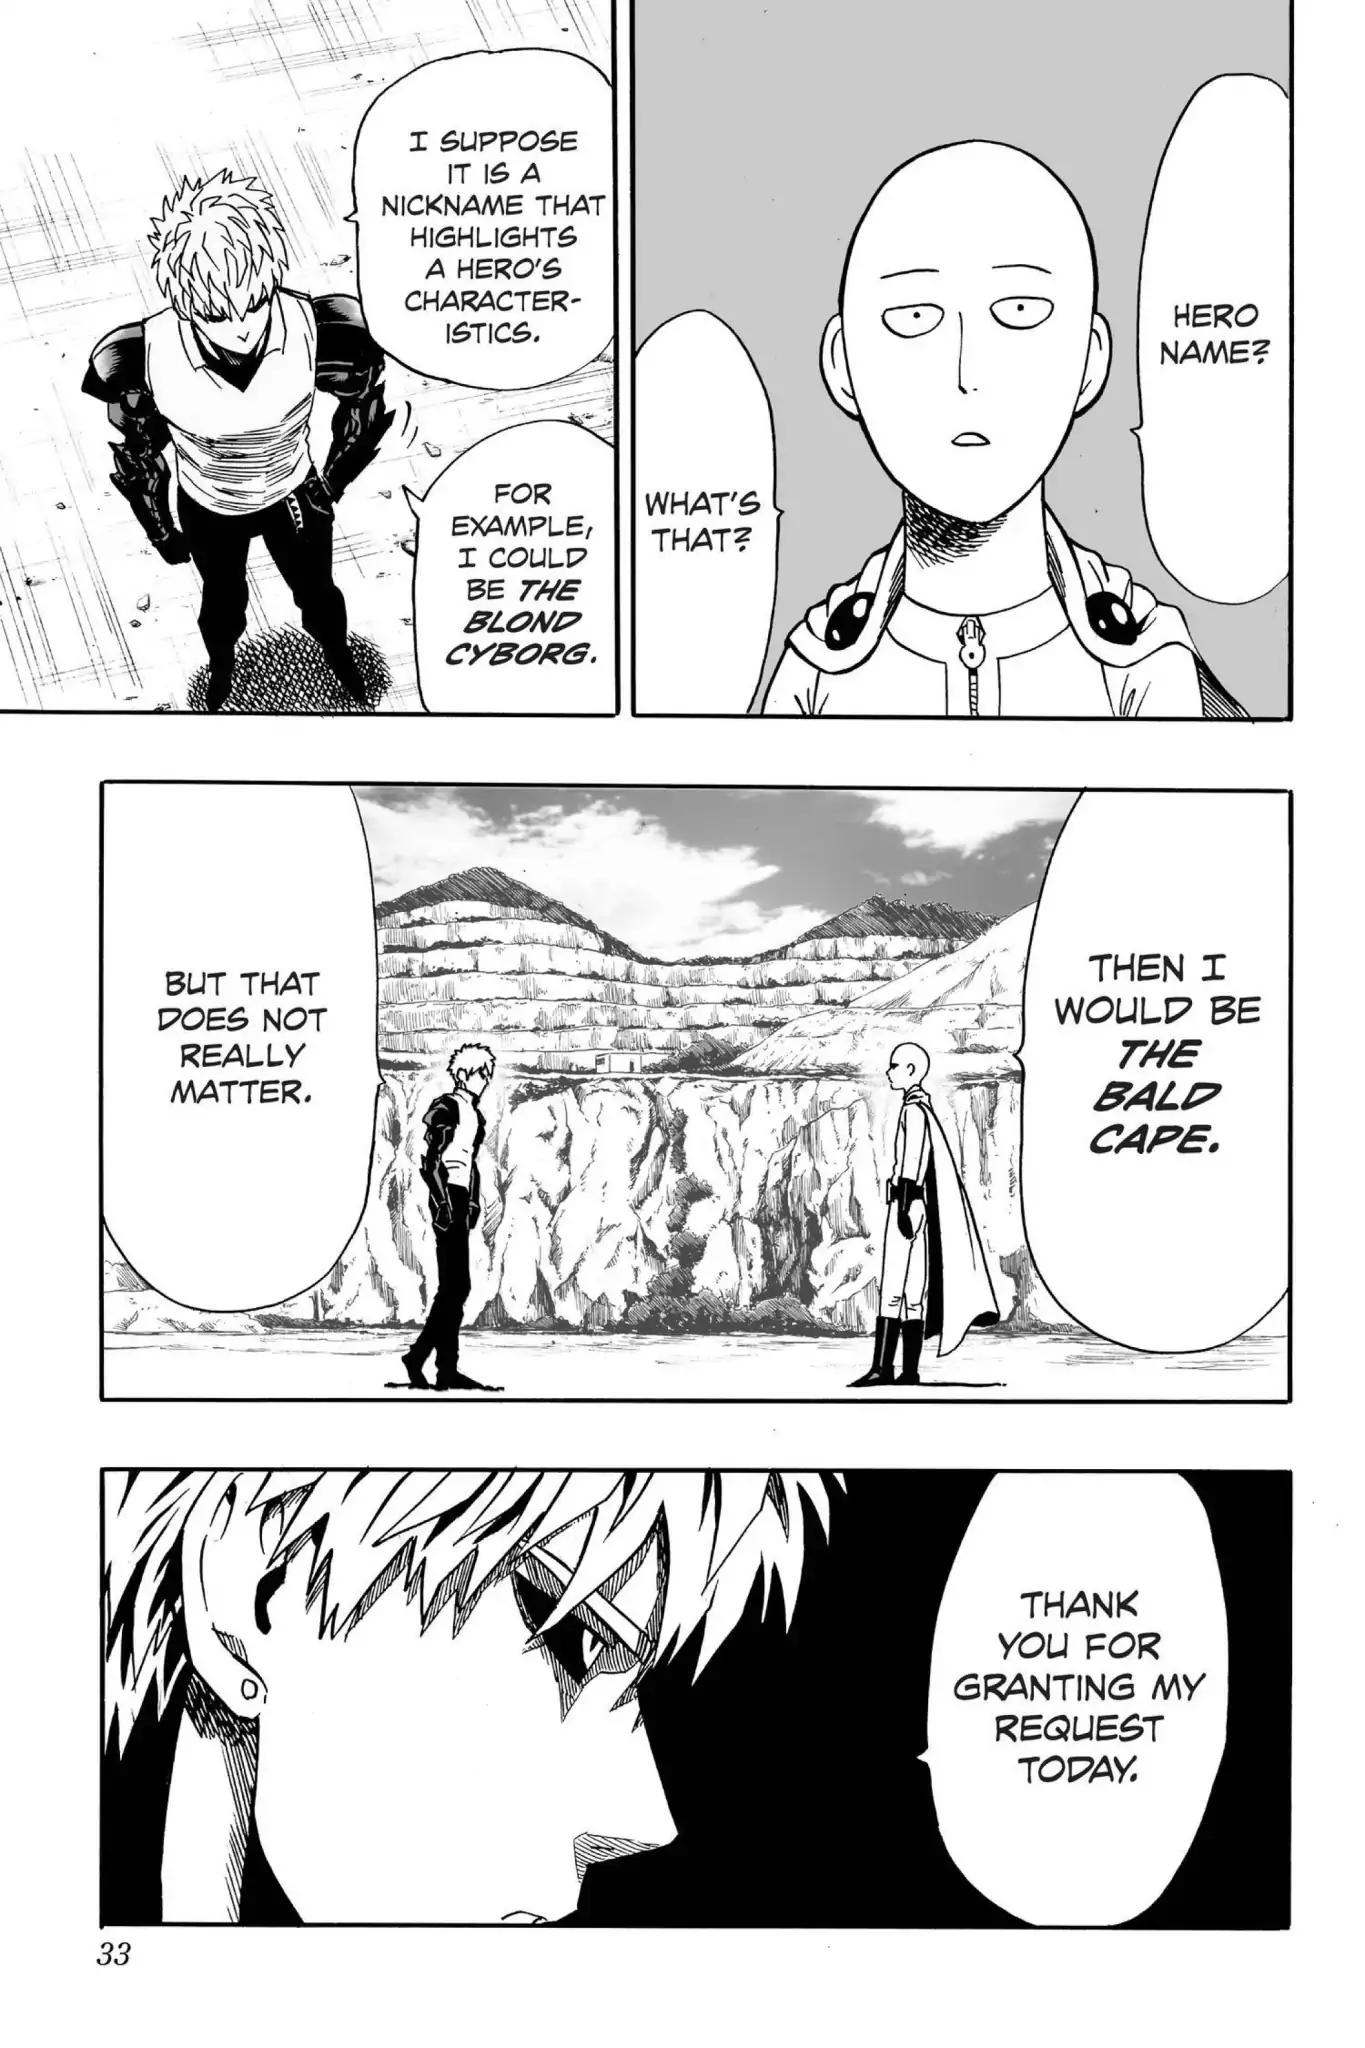 One-Punch Man chapter 17 page 3